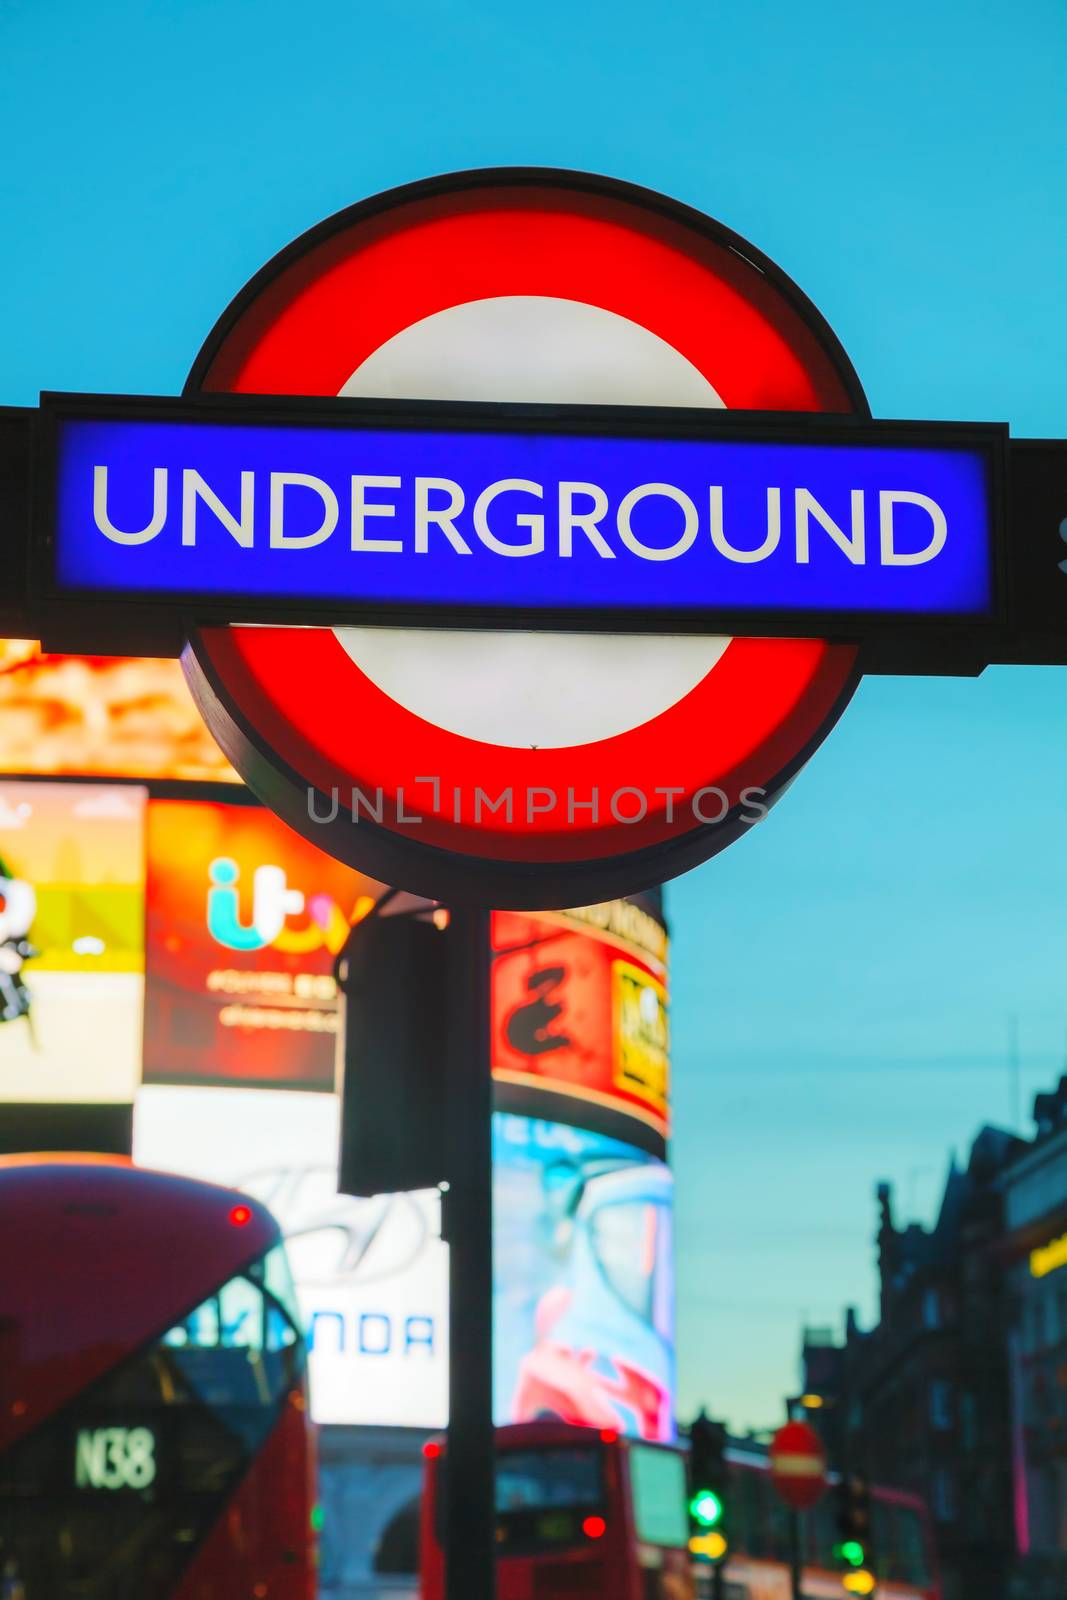 LONDON - APRIL 12: London underground sign at the Piccadilly Circus station on April 12, 2015 in London, UK. It's a road junction and public space of London's West End in the City of Westminster, built in 1819.